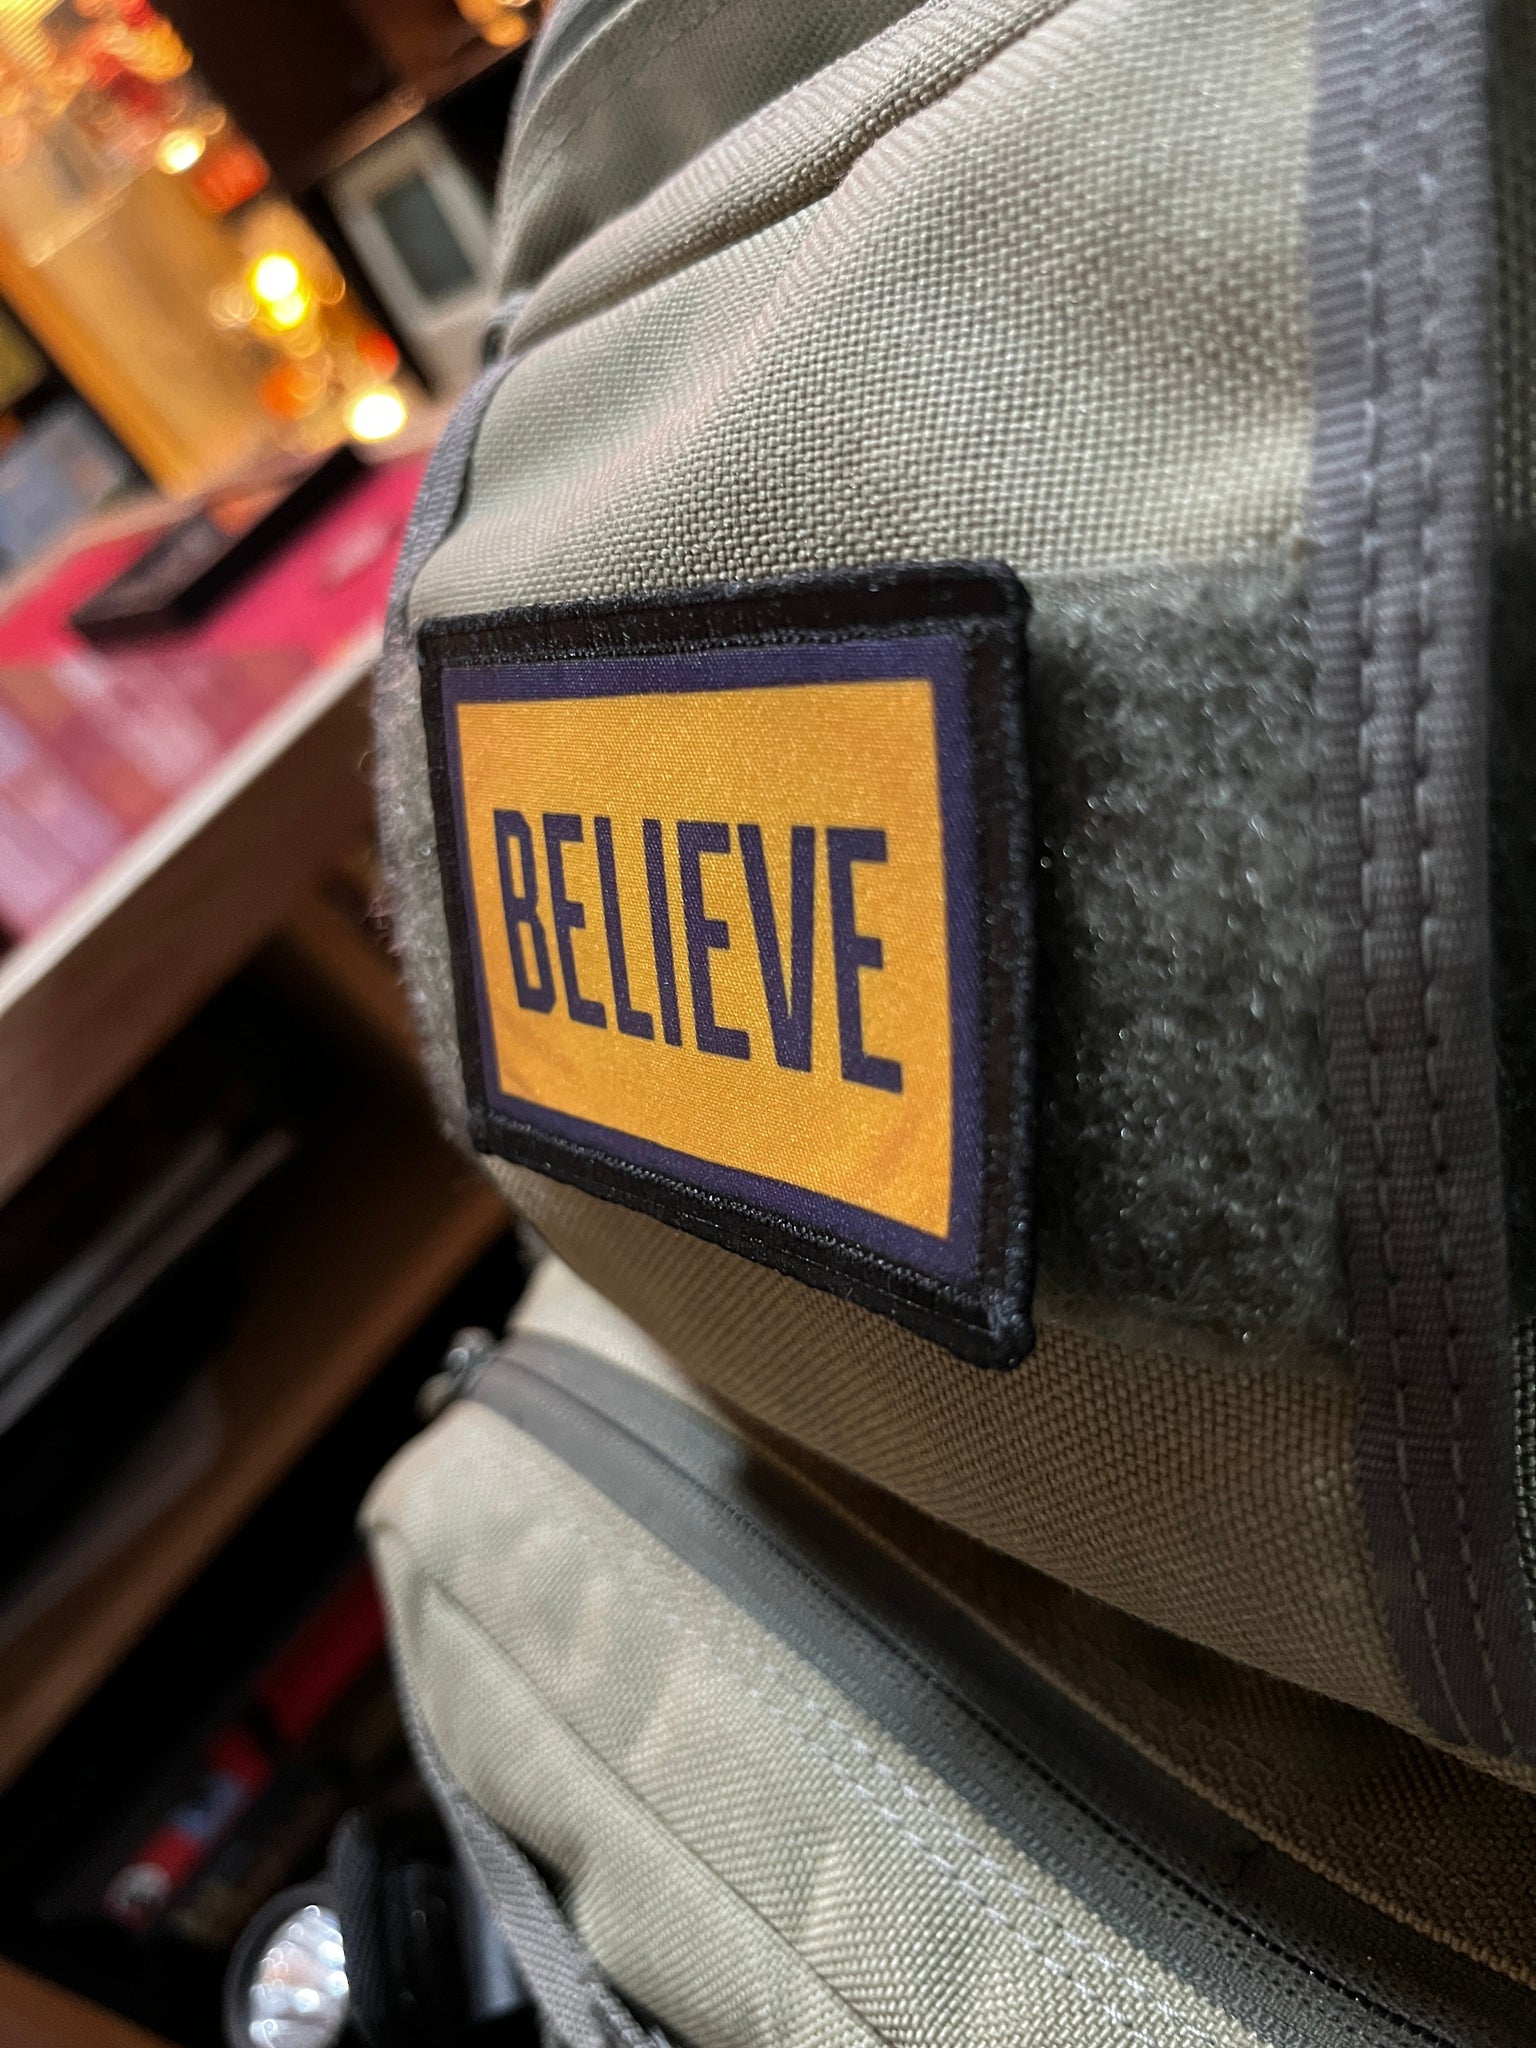 BELIEVE Morale Patch Morale Patches Redheaded T Shirts 